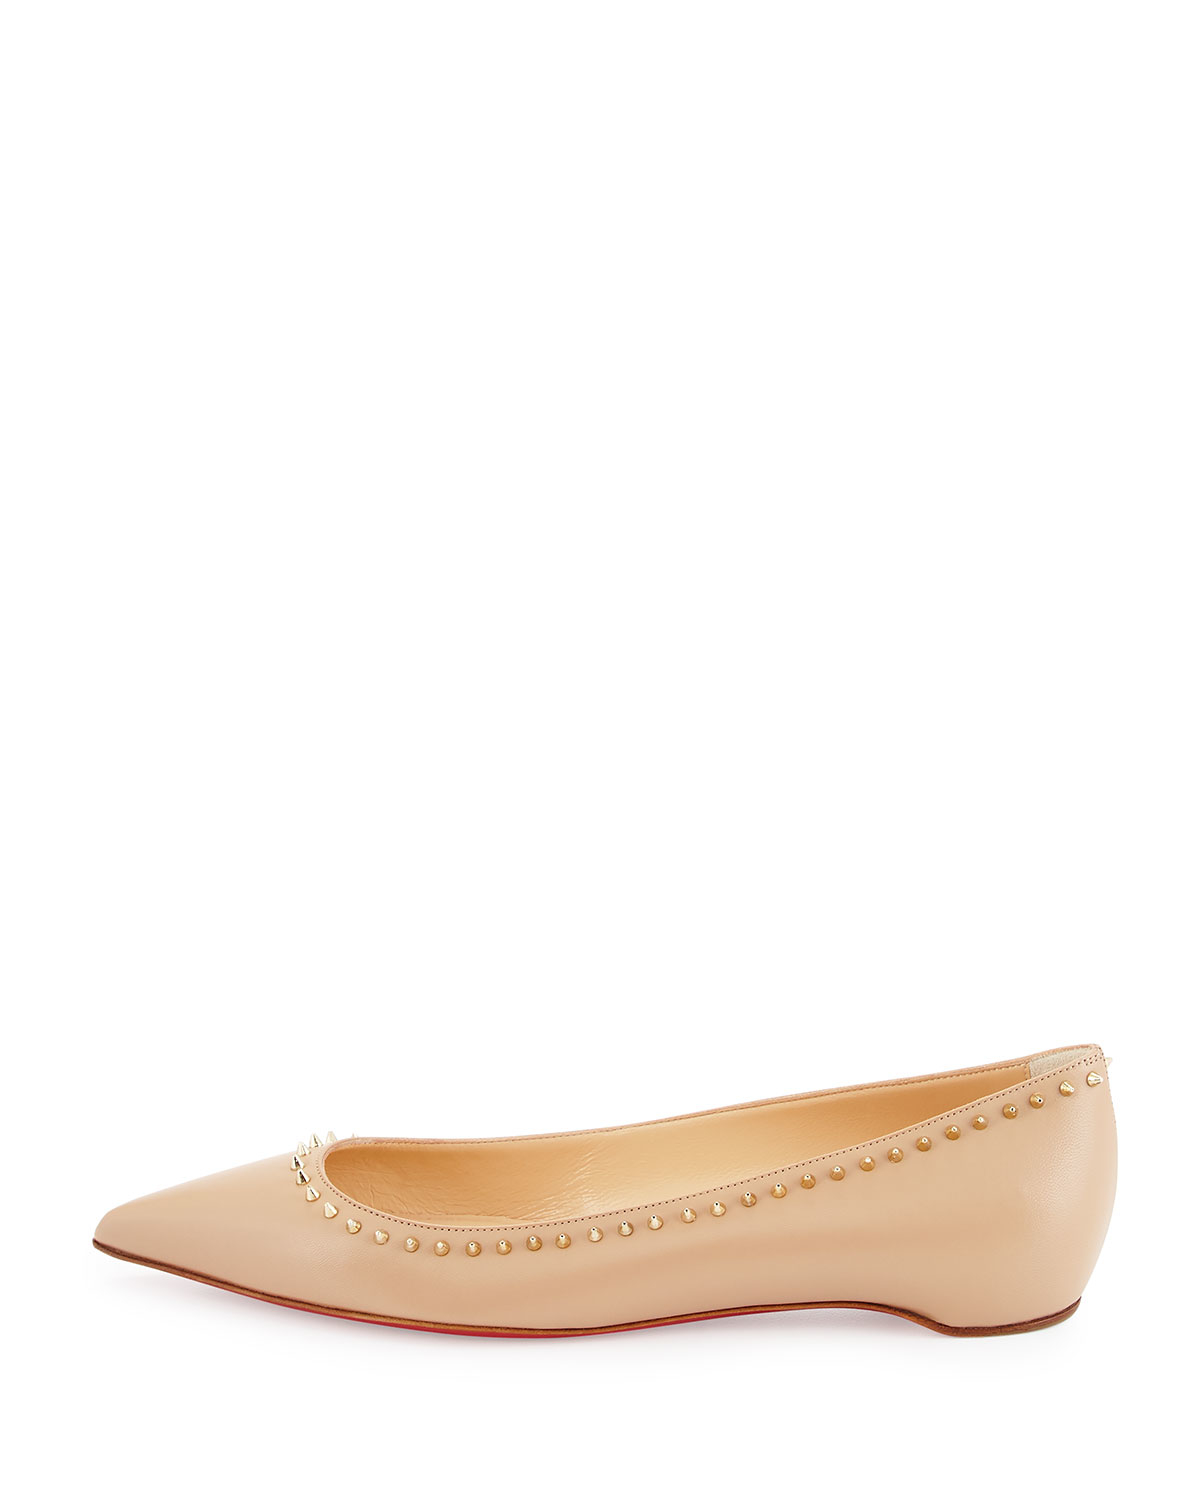 Christian louboutin Anjalina Studded Leather Ballet Flats in Beige ...  